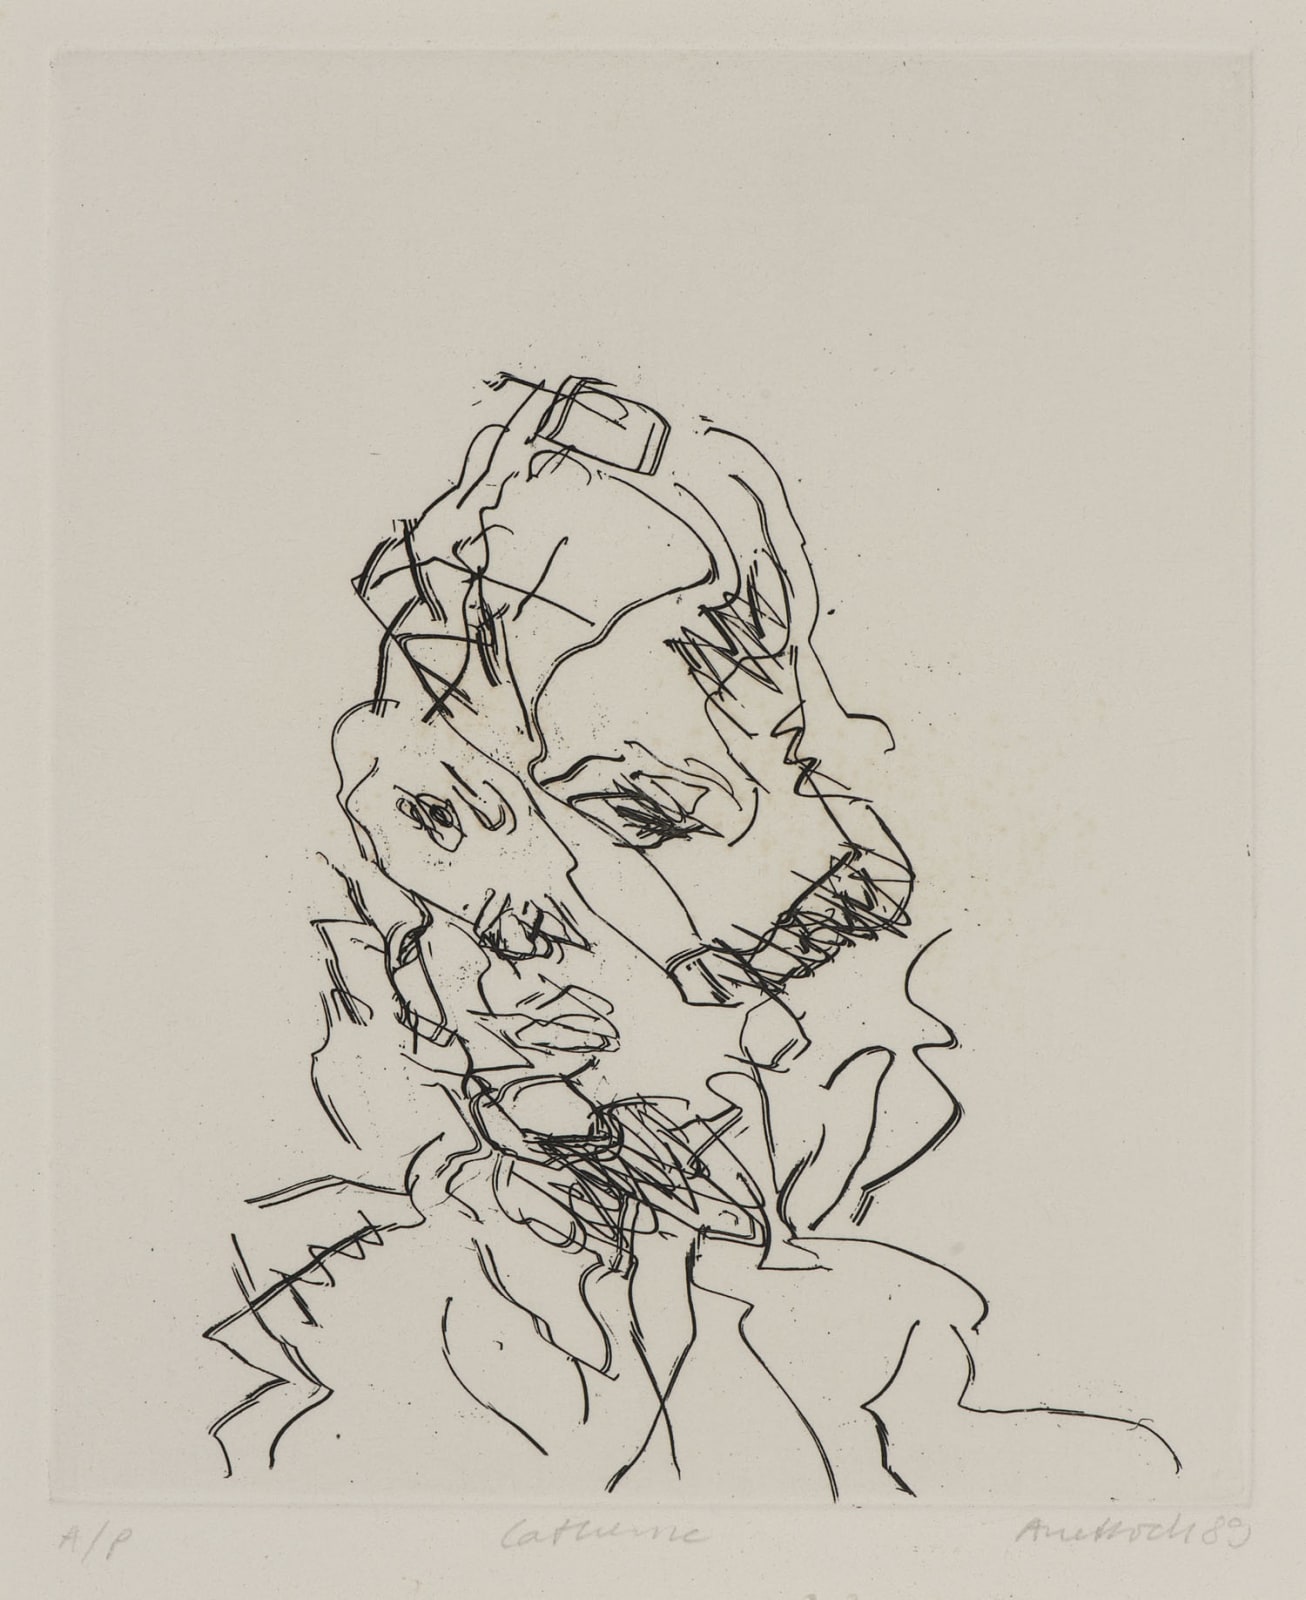 Frank Auerbach (1931-) Catherine, Series: Part of Seven Portraits 1989 Etching, printed on Somerset white paper, artist's proof outside the published edition of 50 20 x 16.5 cm Ben Uri Collection © Frank Auerbach, courtesy Marlborough Fine Art To see and discover more about this artist click here